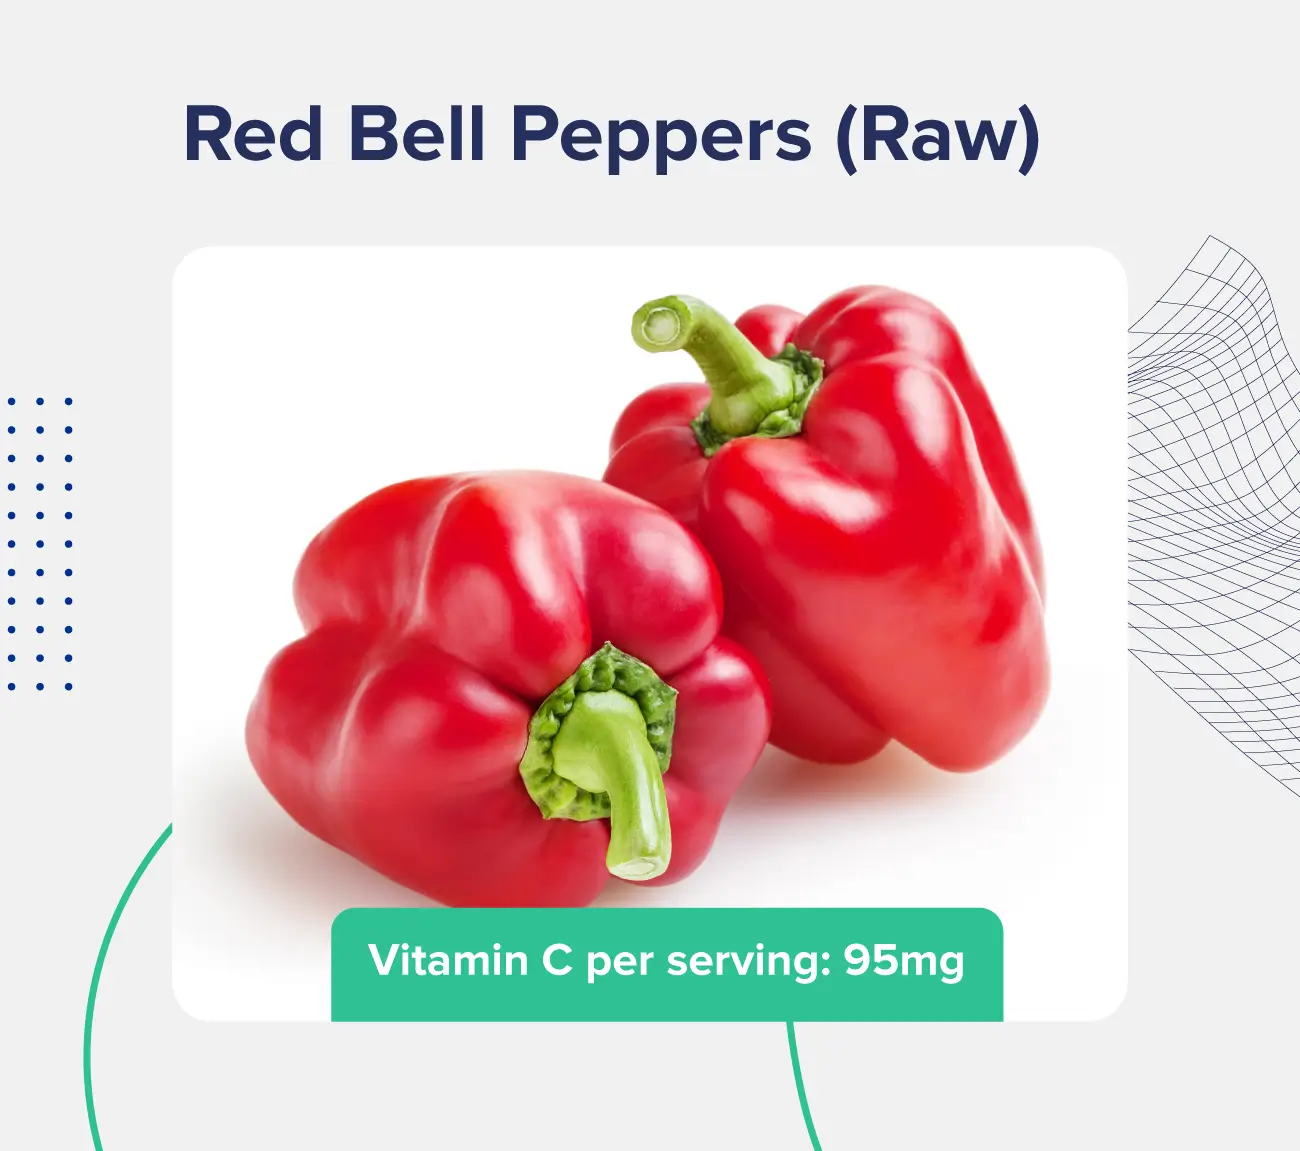 A graphic depicting an image of red bell peppers and listing the vitamin C content (95 milligrams per serving)